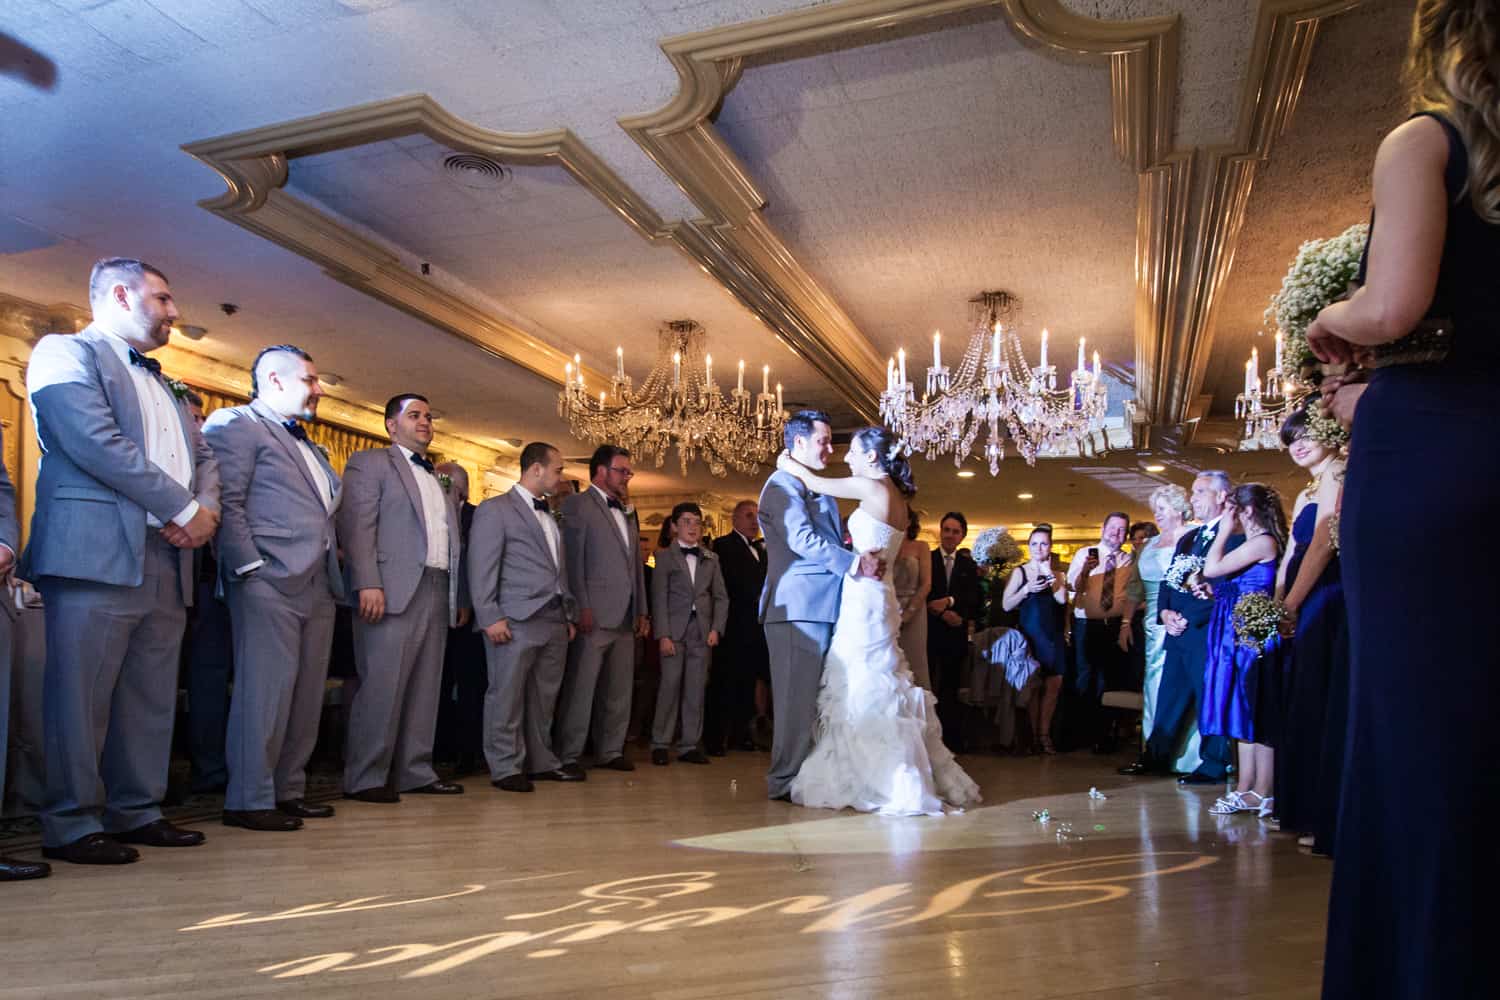 Bride and groom during first dance at a Manor wedding reception